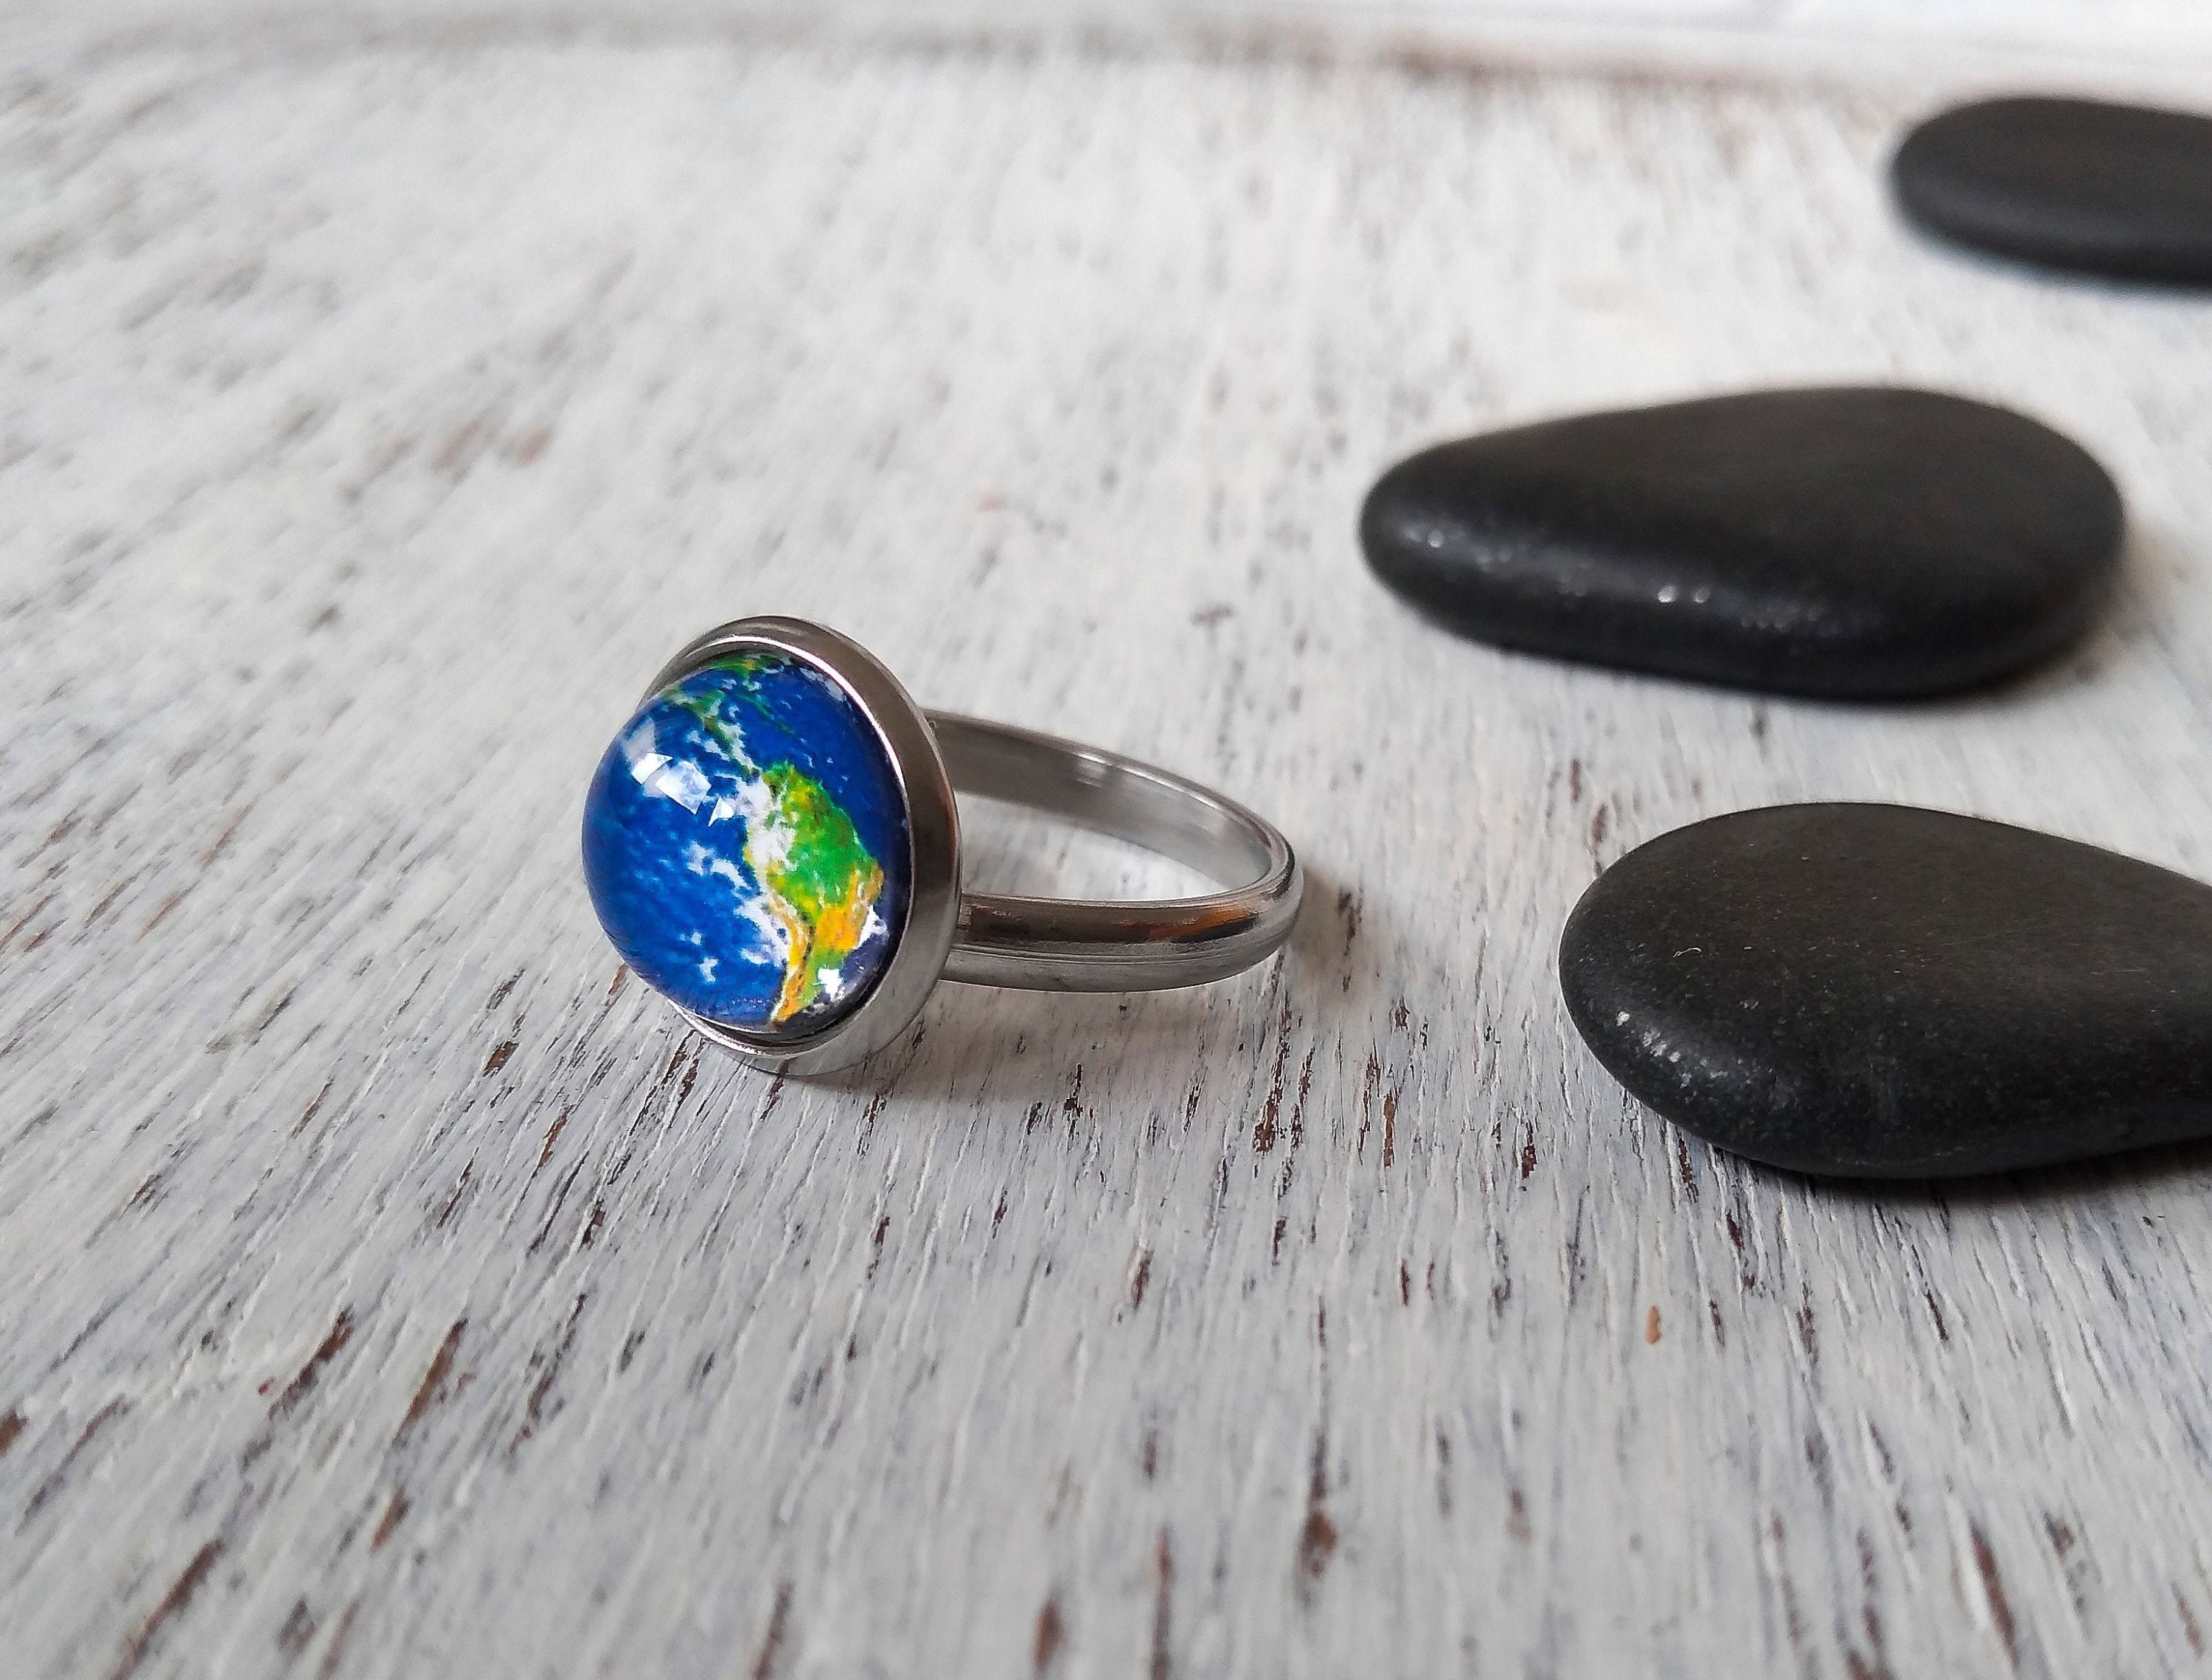 Earth Planet Elements Ring, Sterling Silver, 4 Alchemical Elements Band,  Four Symbols : Earth Air Water Fire, Meditation Astrology jewelry